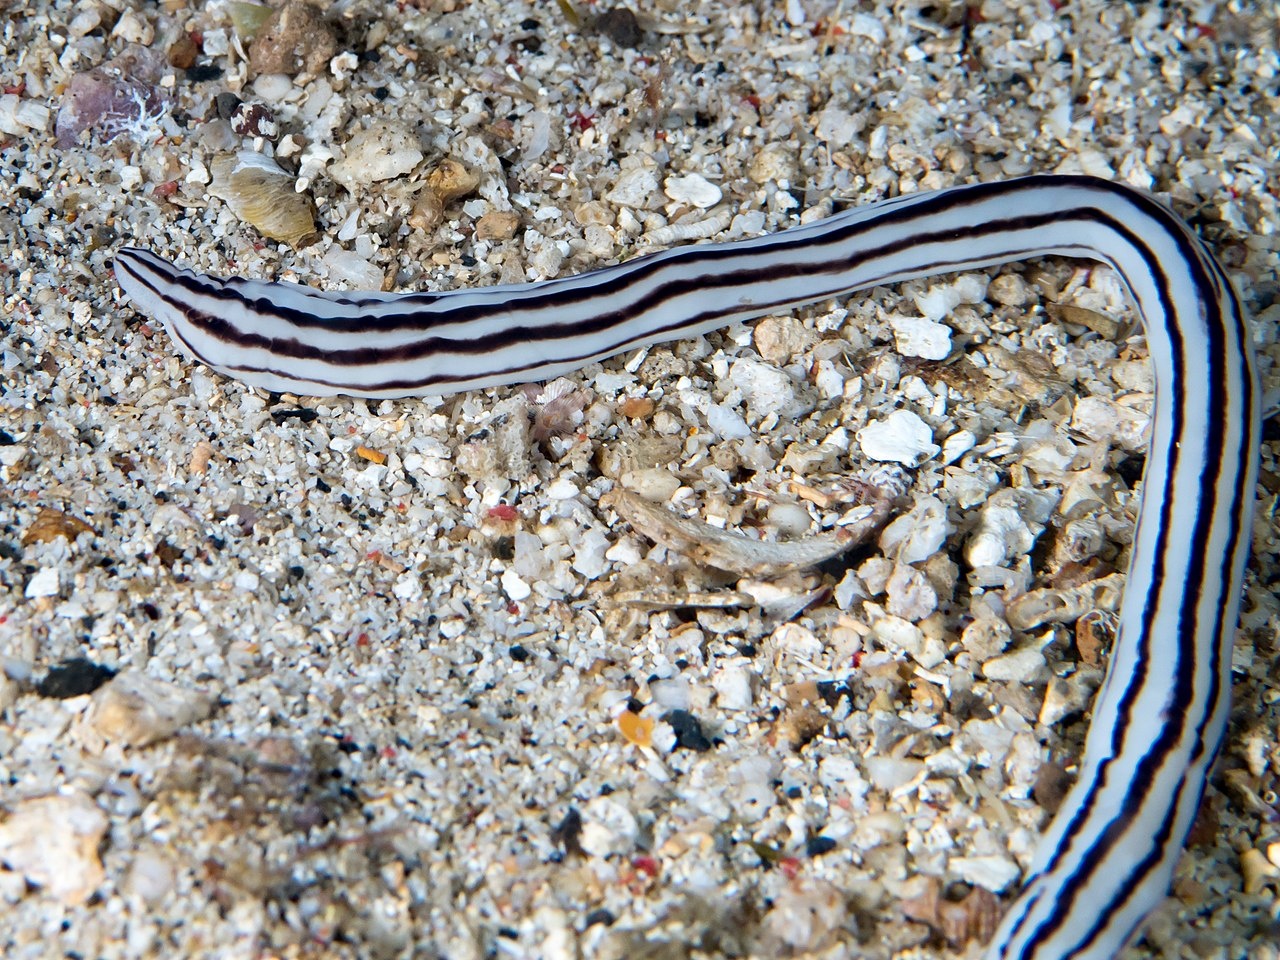 Ver rubané à 5 lignes - Baseodiscus quinquelineatus - <a href='https://commons.wikimedia.org/wiki/File:Five-lined_Ribbon_Worm_(Baseodiscus_quinquelineatus)_(45202334604).jpg' title='via Wikimedia Commons'>Rickard Zerpe</a> / <a href='https://creativecommons.org/licenses/by/2.0'>CC BY</a> - BioObs